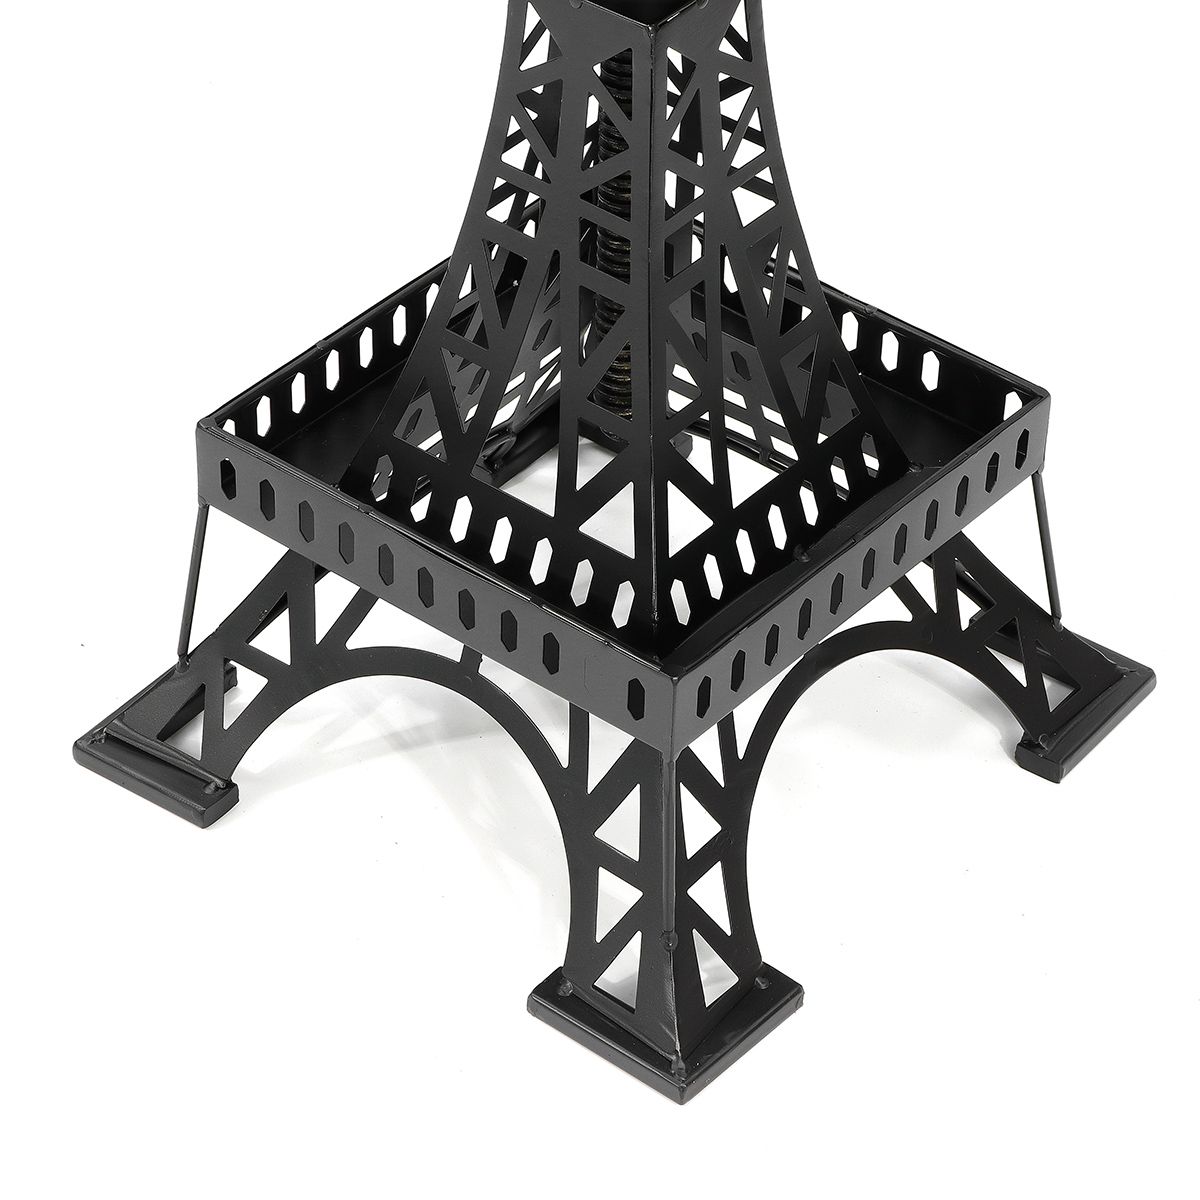 Vintage-Unique-Industrial-Iron-Tower-Metal-Black-Bar-Stool-Chair-Round-Wooden-Top-Kitchen-Side-Table-1599043